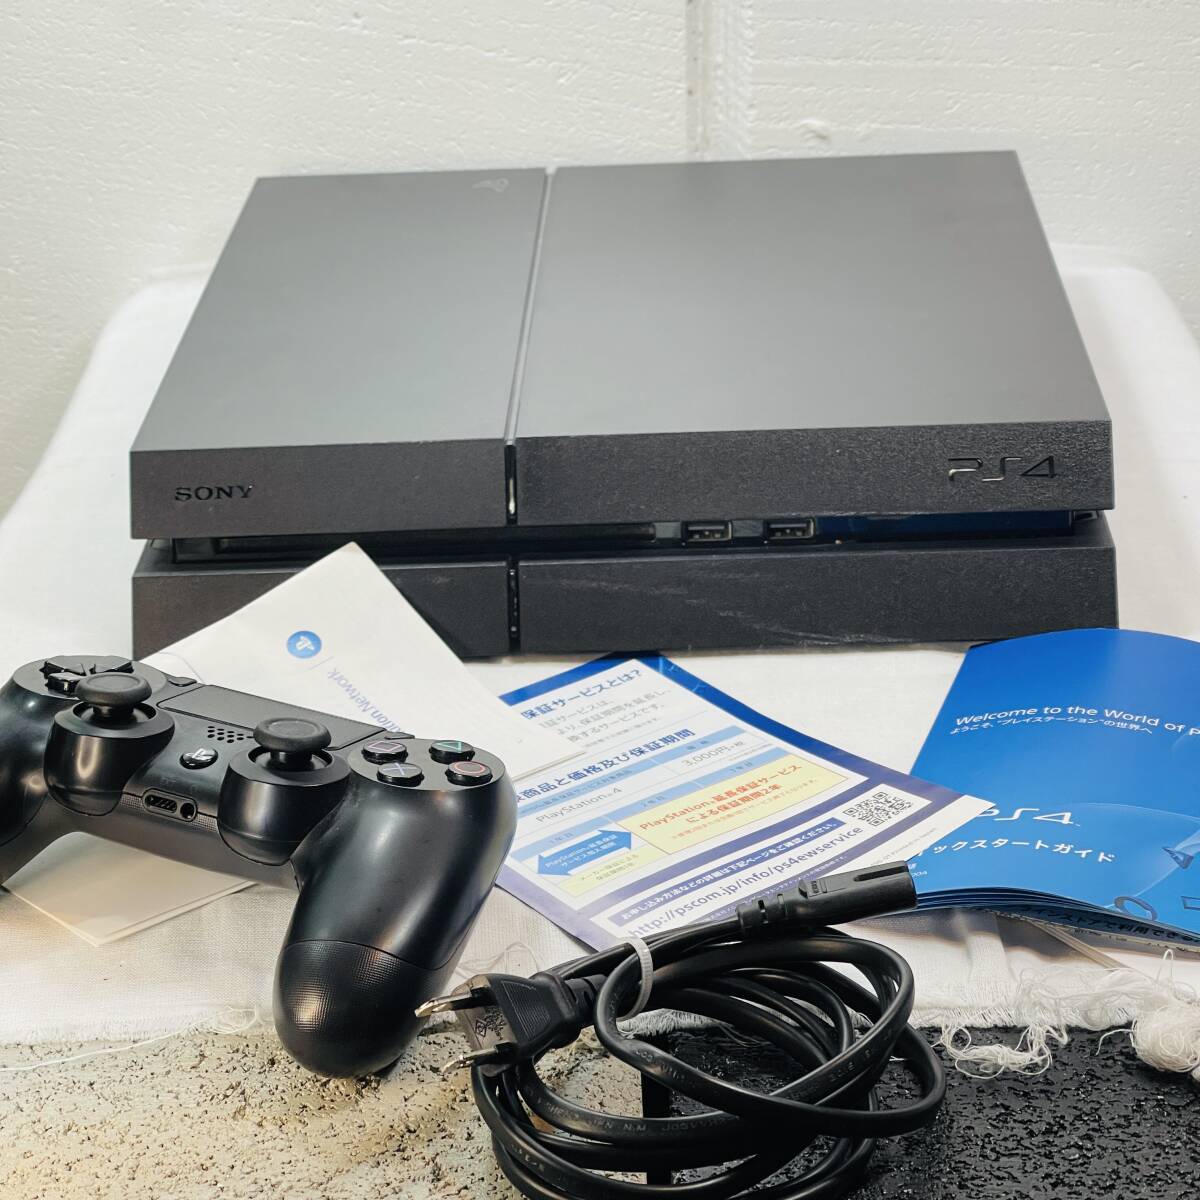 PS4 PlayStation Ⅳ operation verification ending the first period . ending MODEL:CUH-1200A 500GB black USED goods 1 jpy start 1 jpy shop 1 start 